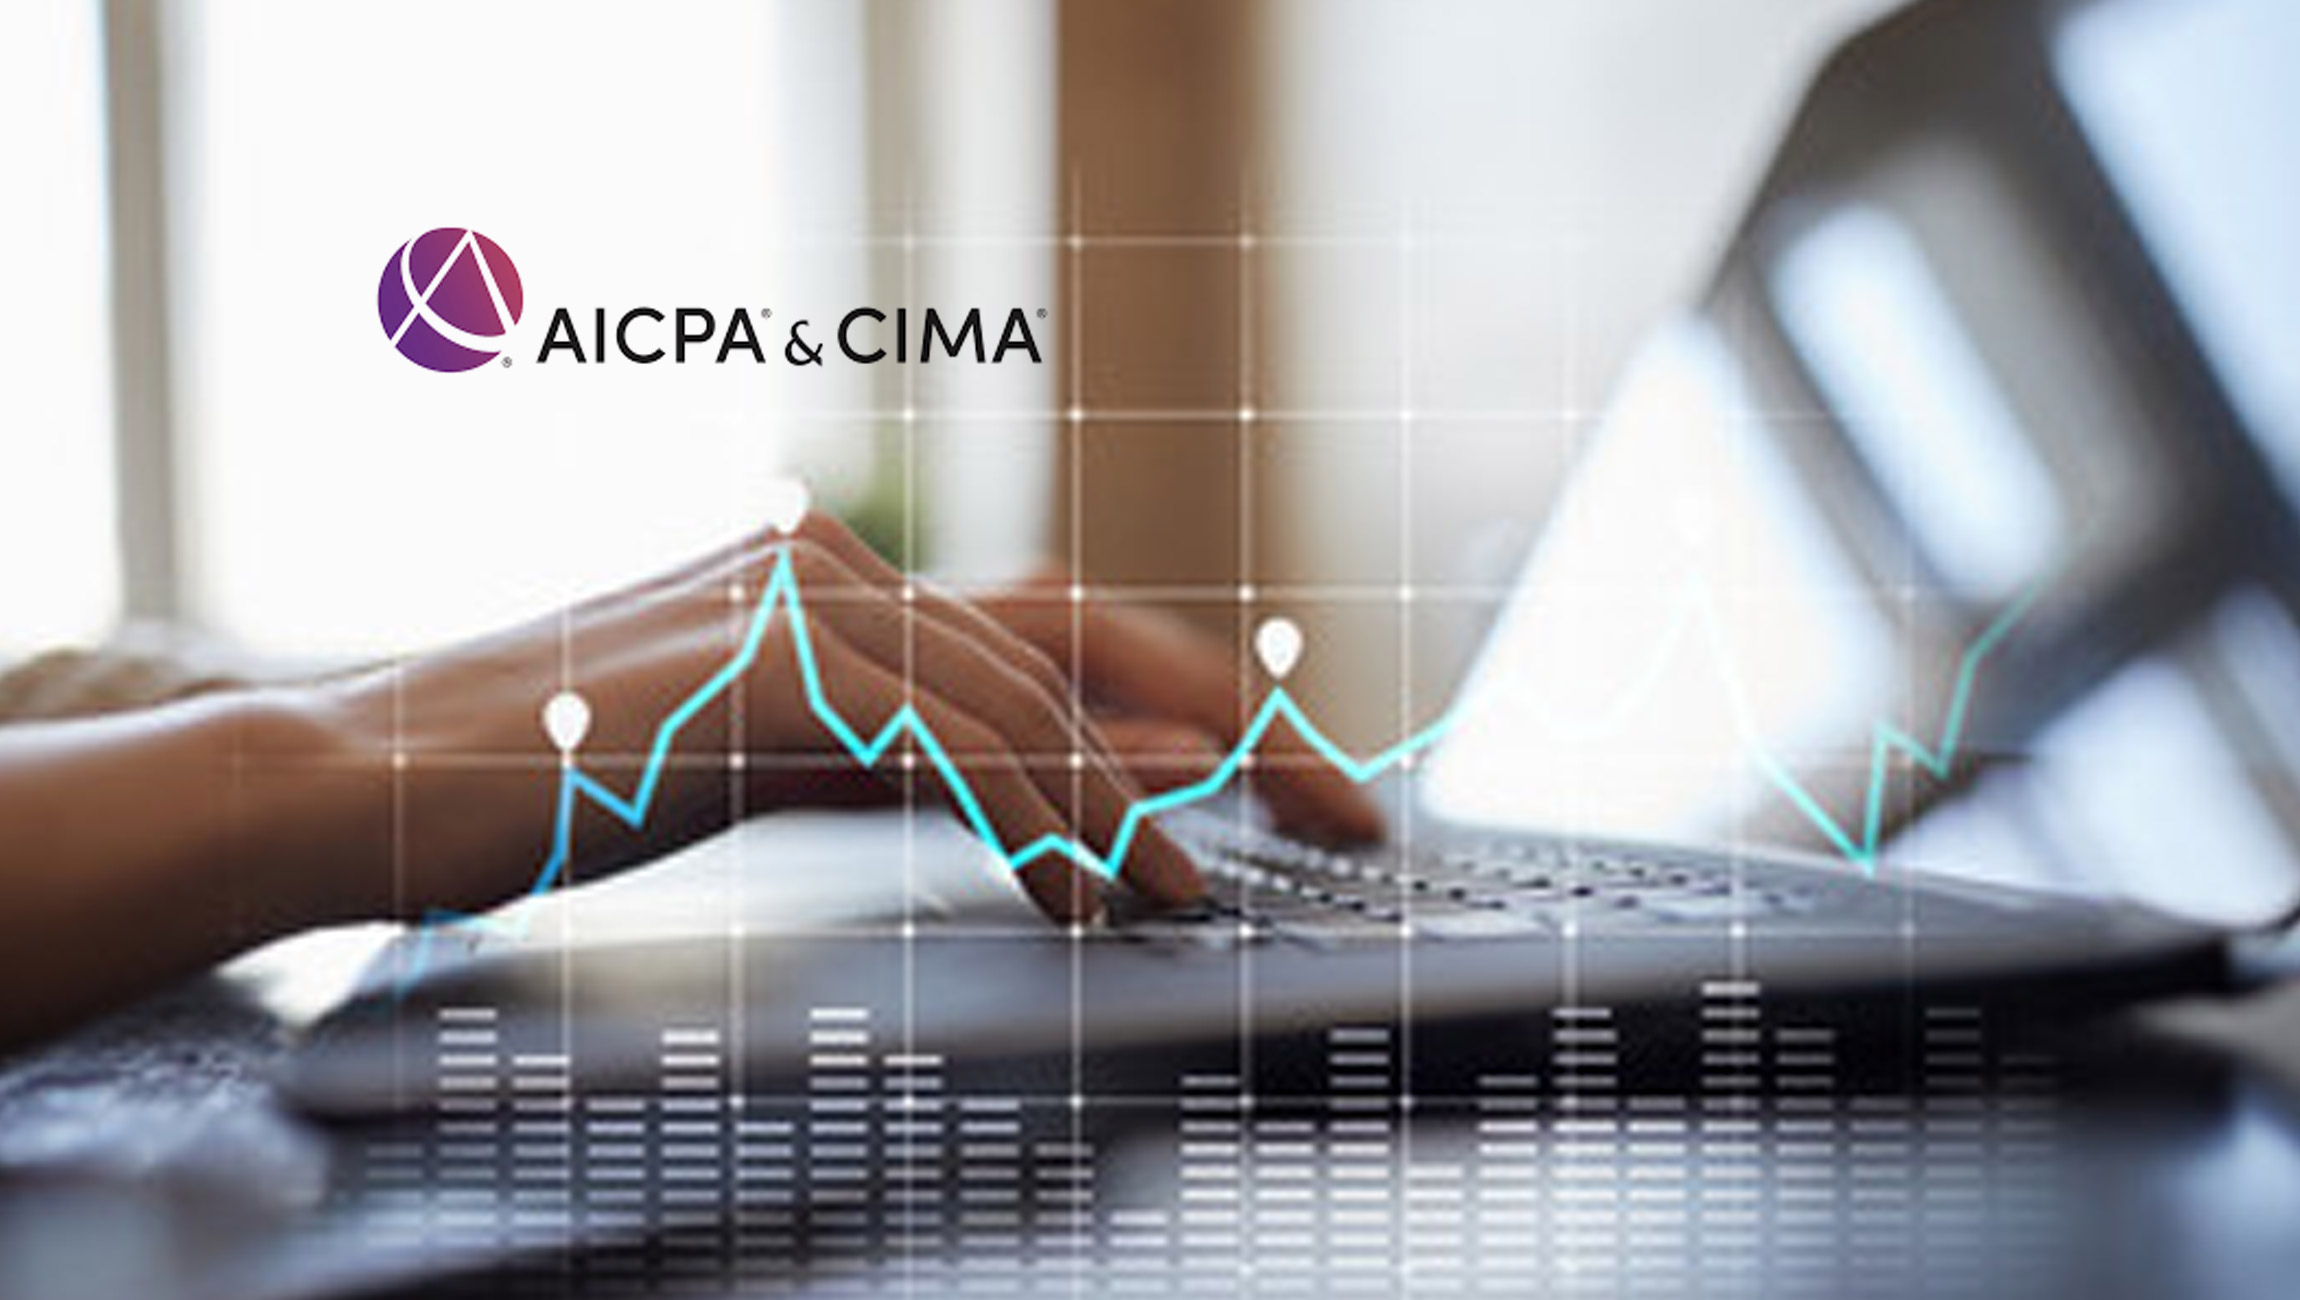 Most U.S. Business Executives Say Economy is Already in Recession or Will Be Before 2023, AICPA & CIMA Survey Finds